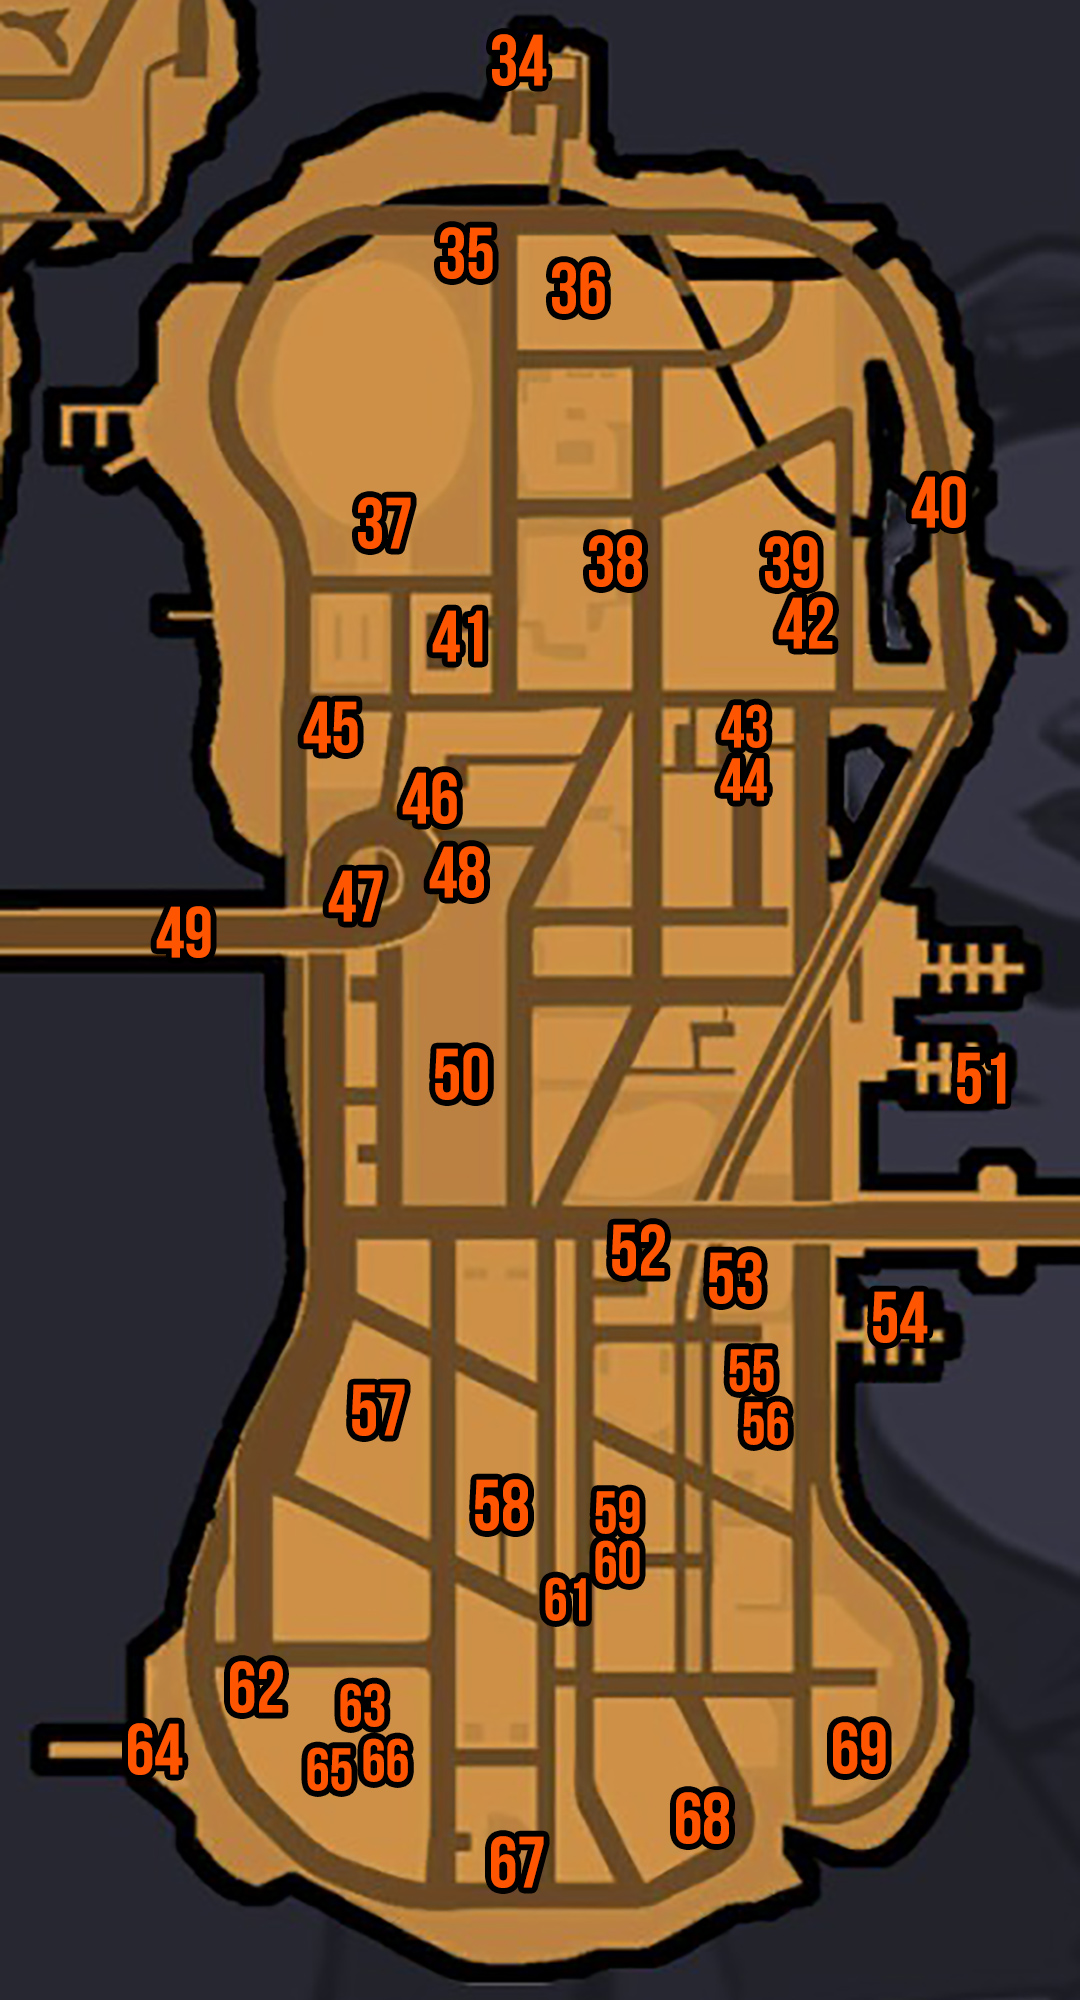 GTA 3: Where to find all 100 Hidden Packages - Millenium